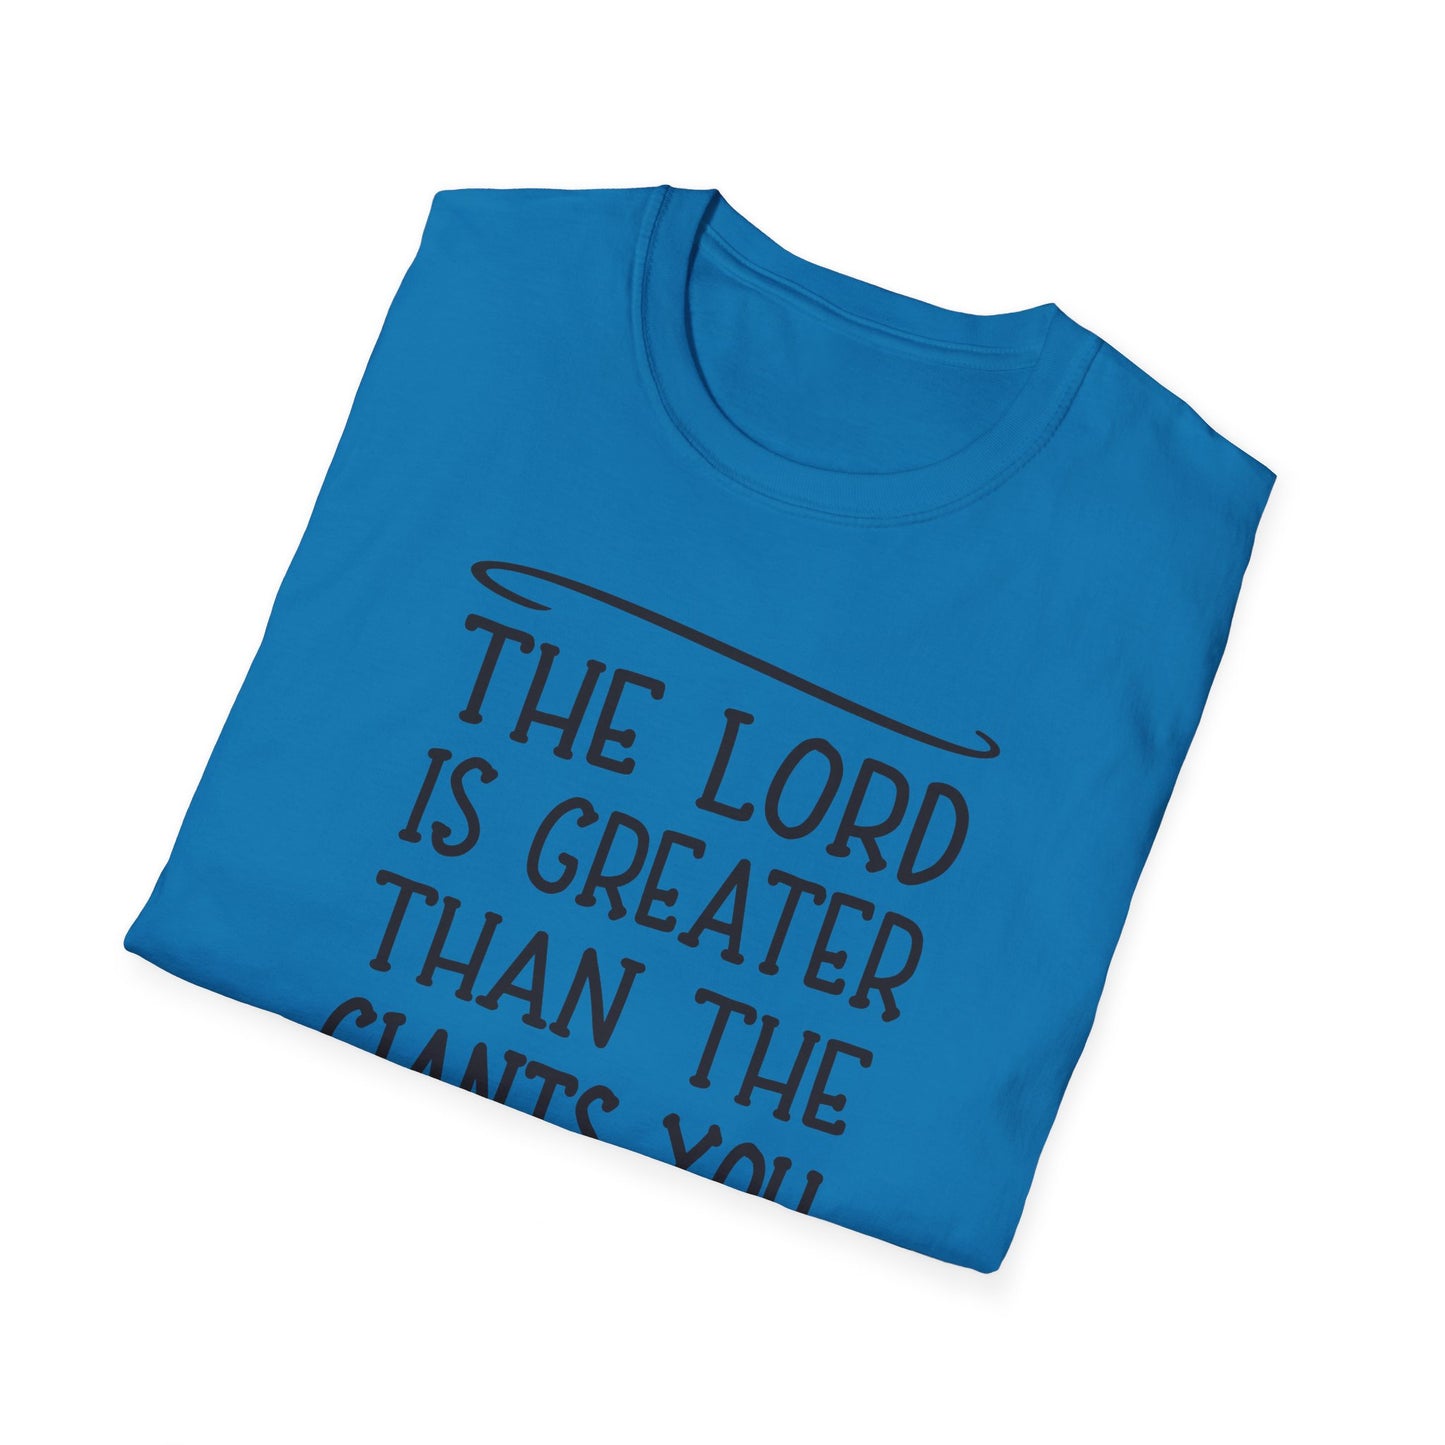 The Lord Is Greater Than The Giants You Face Women's Christian T-shirt